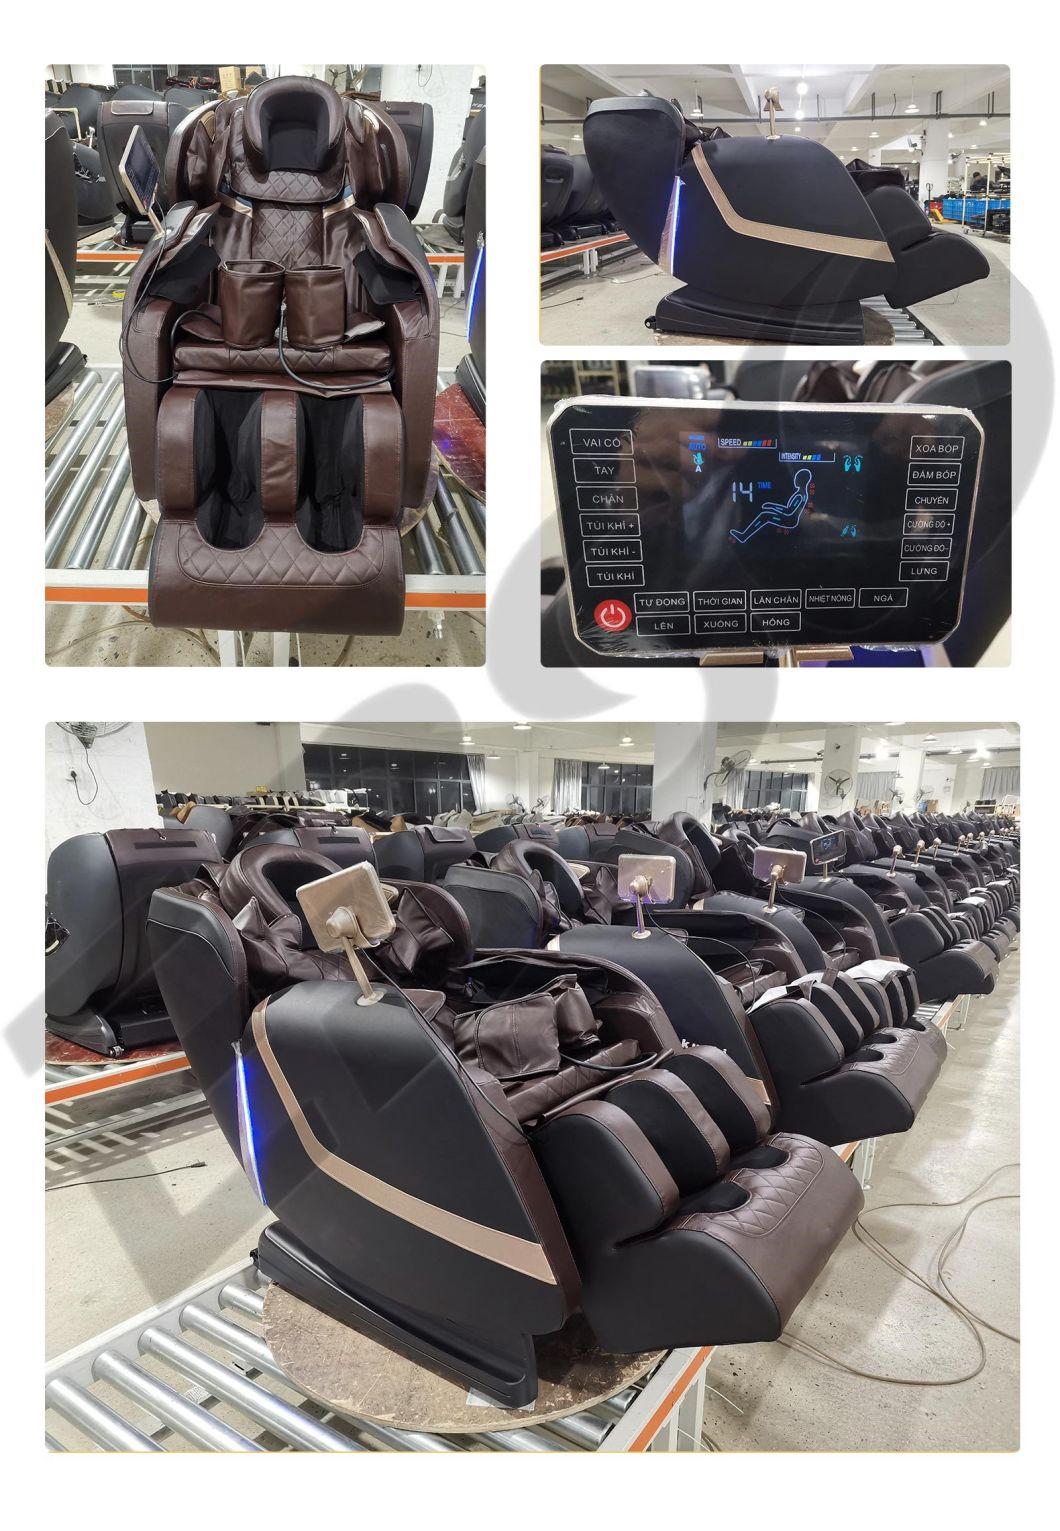 Factory Direct Healthcare Full Body Smart Massage Chair